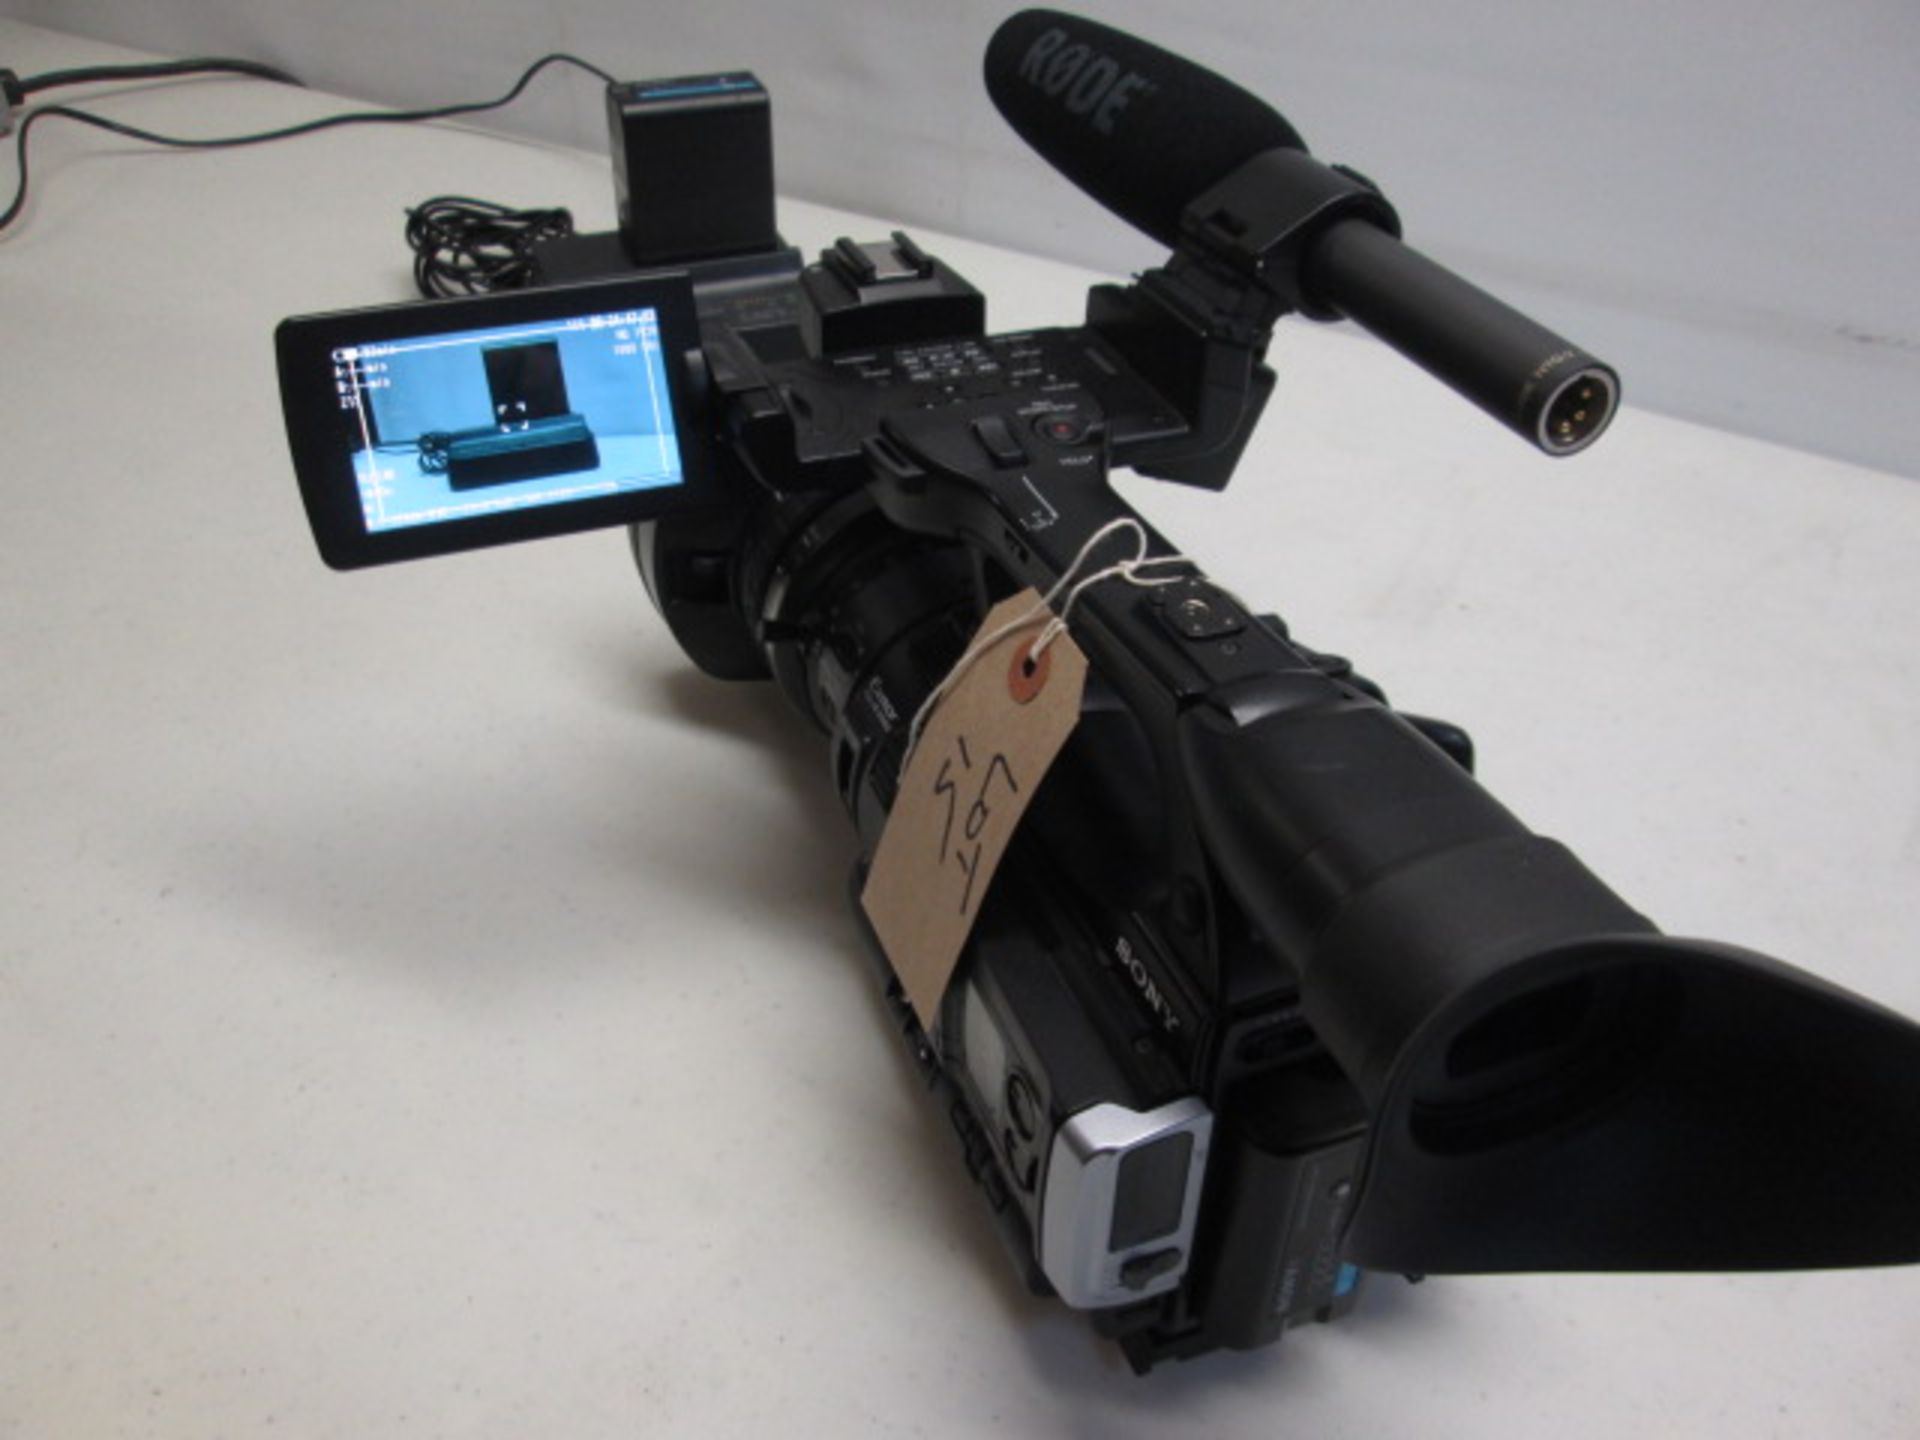 Sony PMW-200 XD Cam, Professional Exmor Full HD Video Camera. Comes with Rode NTG2 Microphone, BPU30 - Image 8 of 8